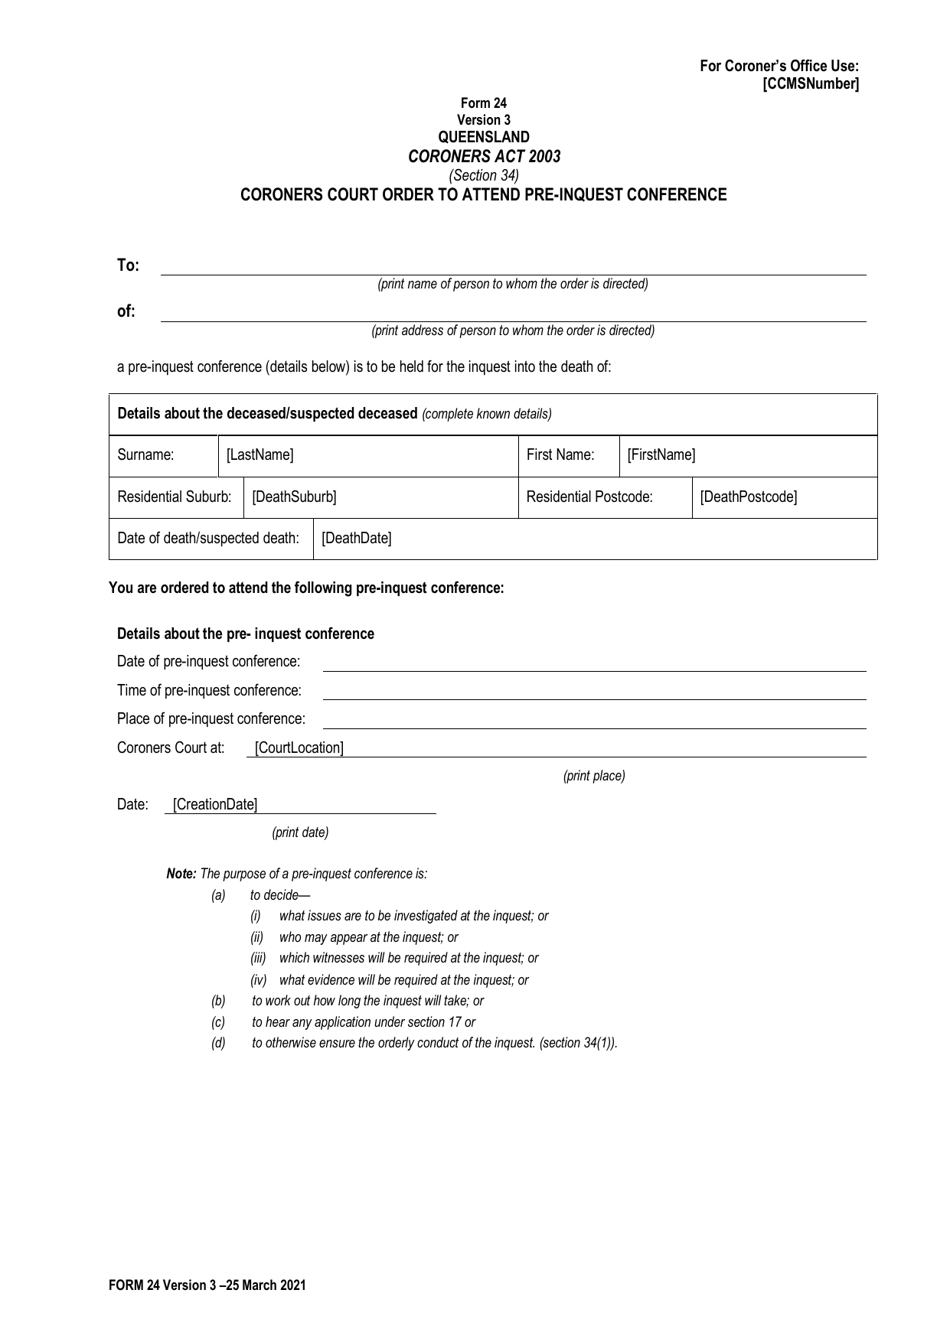 Form 24 Coroners Court Order to Attend Pre-inquest Conference - Queensland, Australia, Page 1